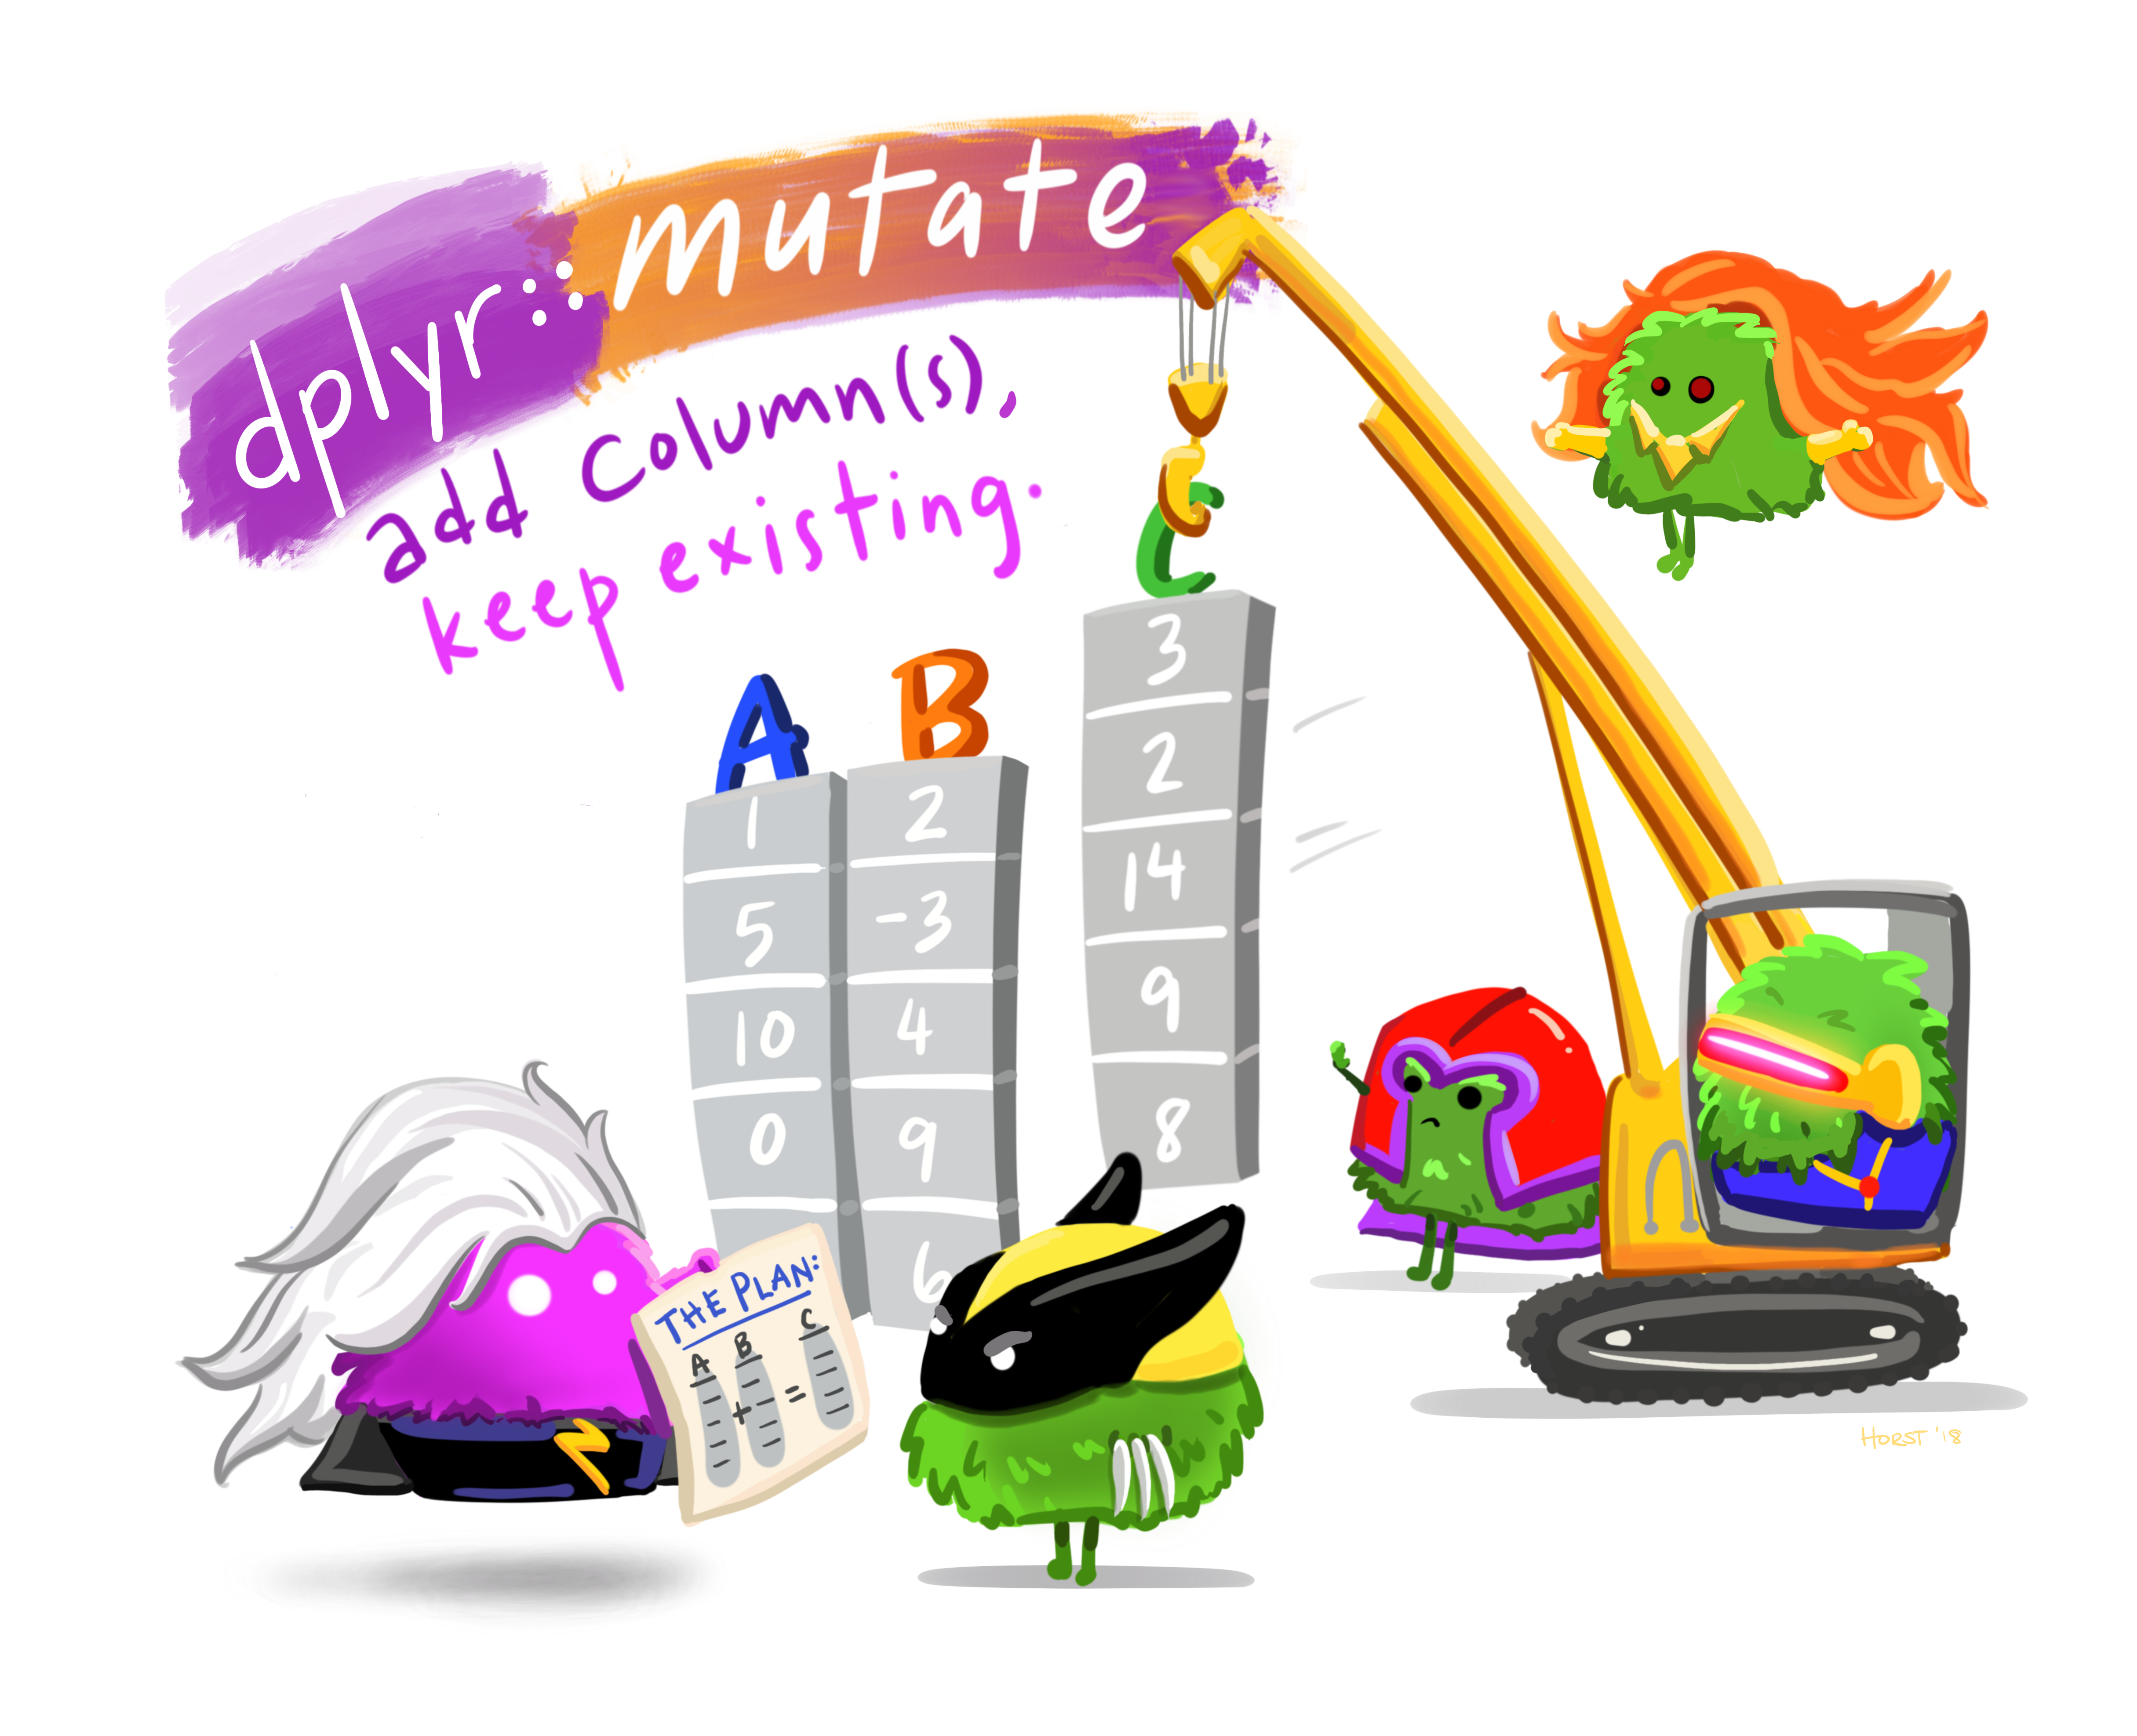 Cartoon of cute fuzzy monsters dressed up as different X-men characters, working together to add a new column to an existing data frame. Stylized title text reads “dplyr::mutate - add columns, keep existing.” Learn more about dplyr::mutate.